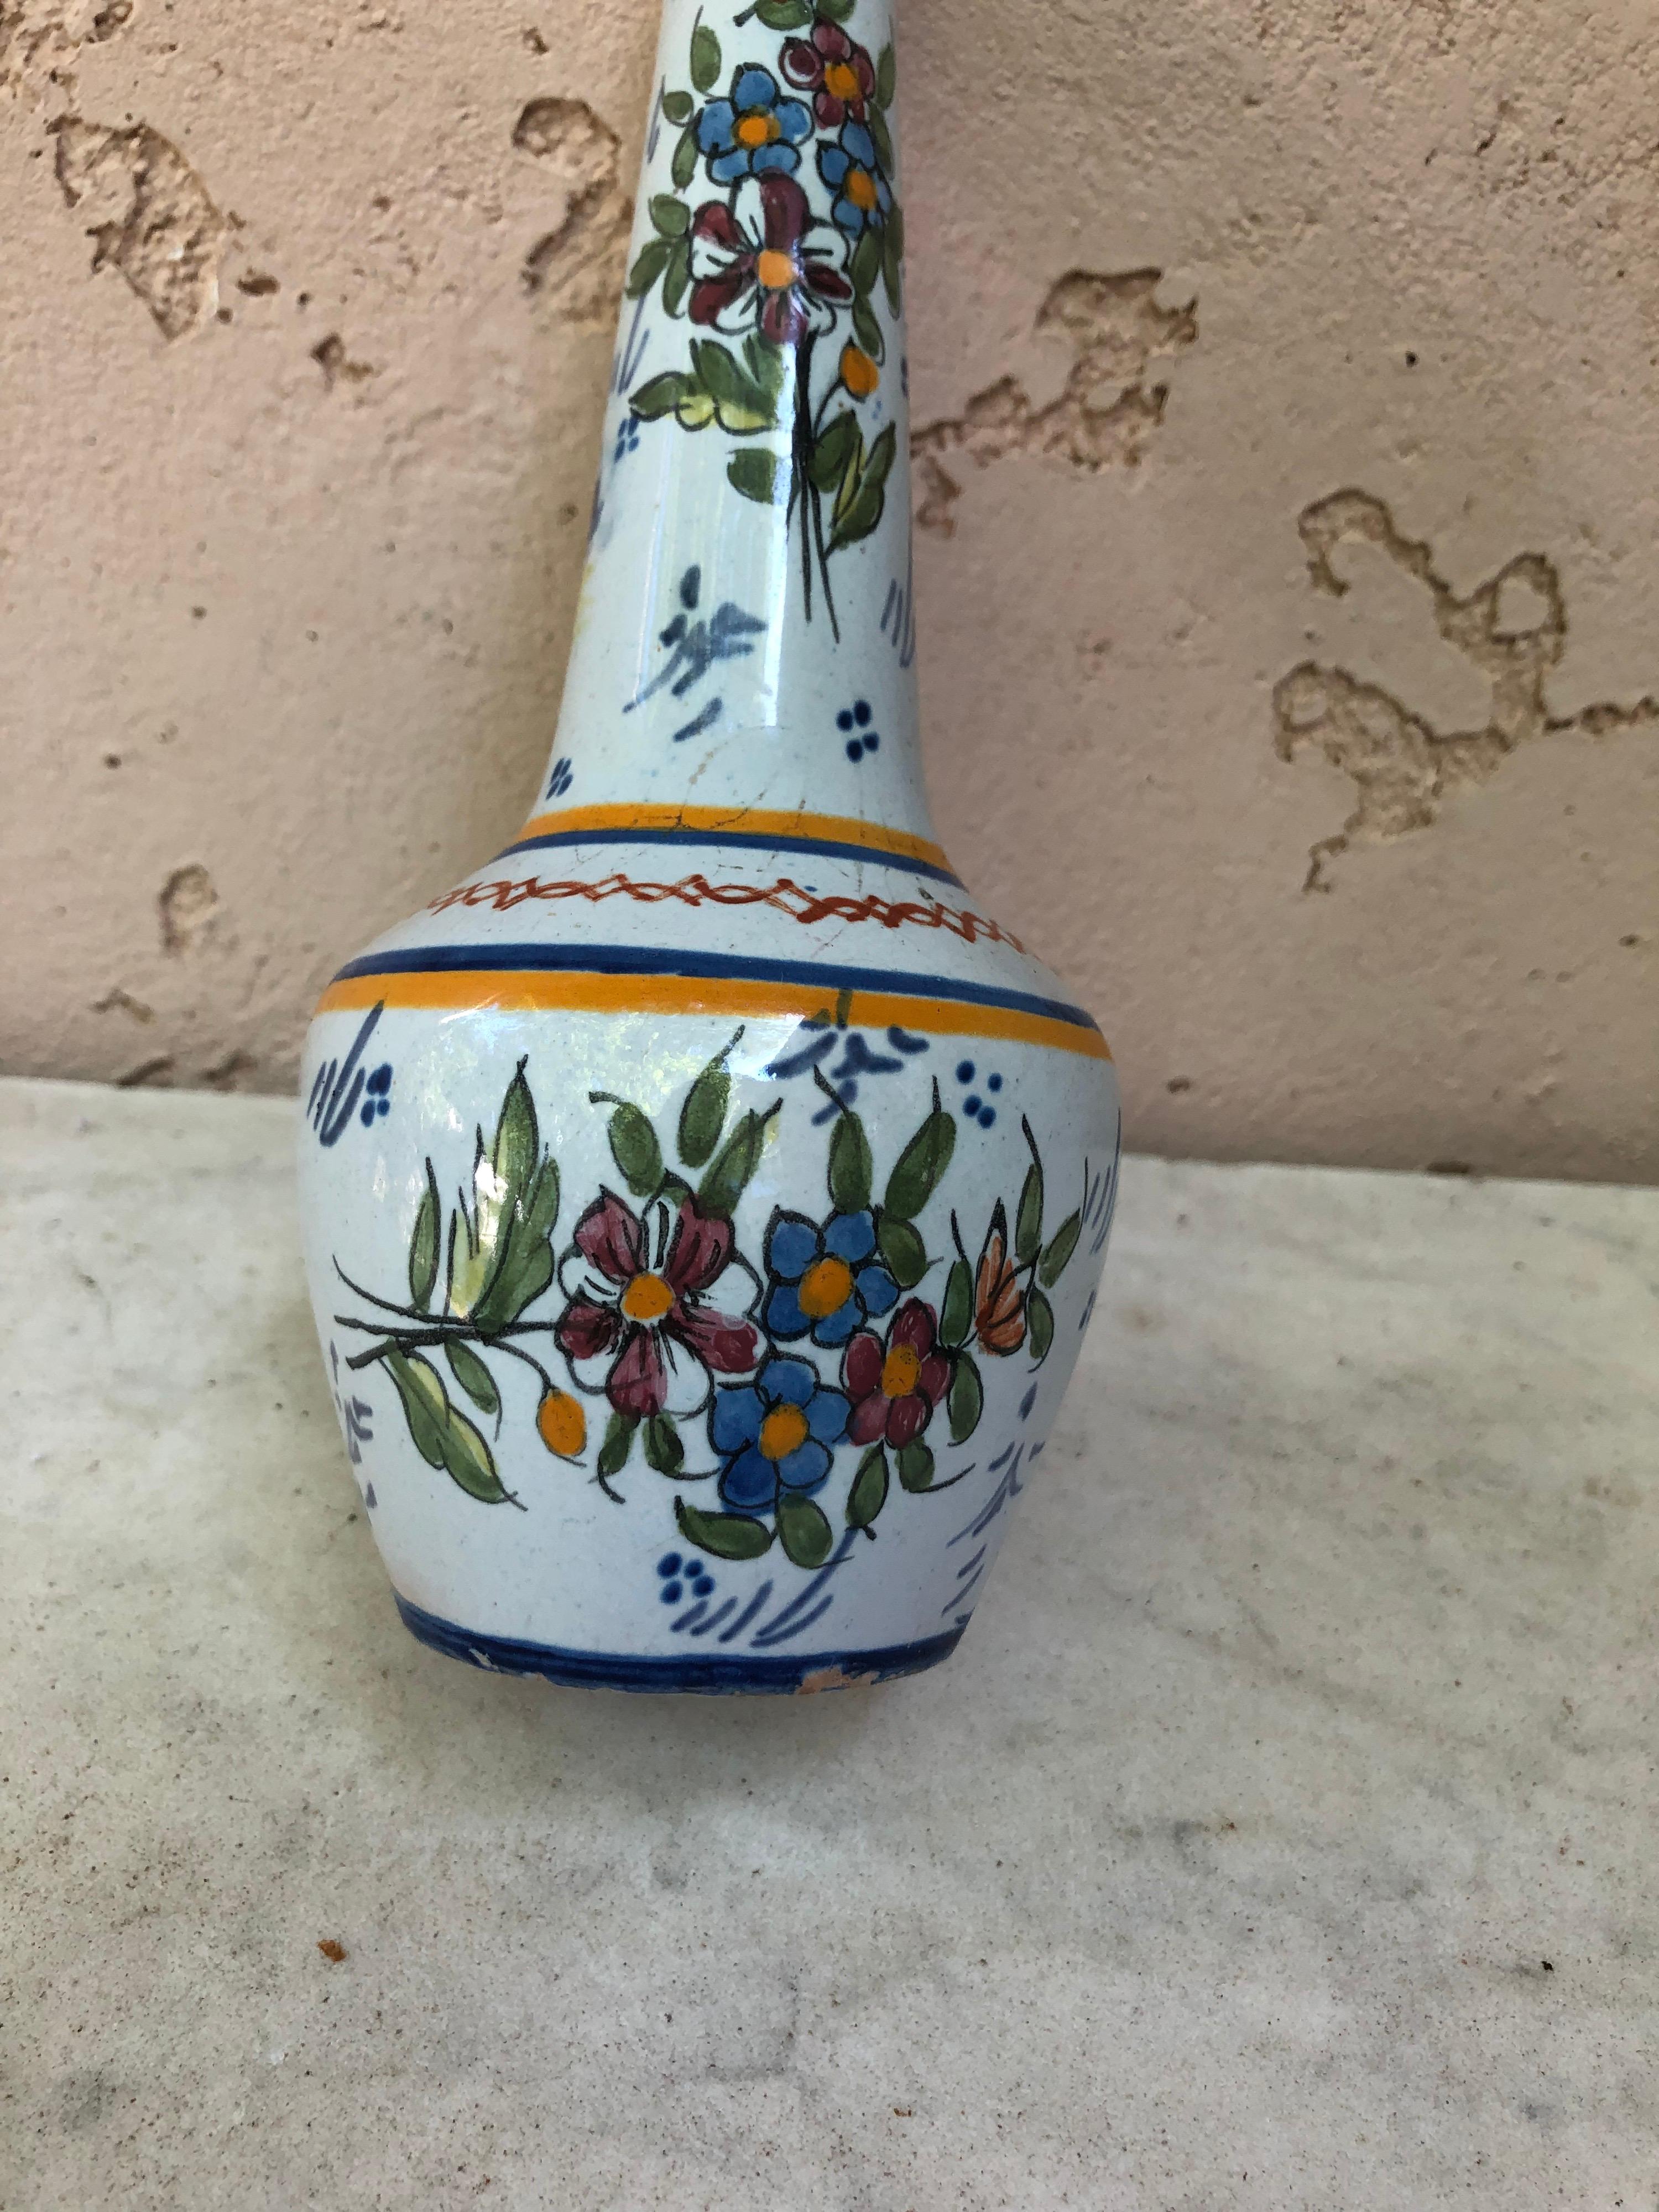 French Faience vase signed HB Quimper Circa 1900.
Decorated with flowers, a farmer from Brittany and Brittany symbol.